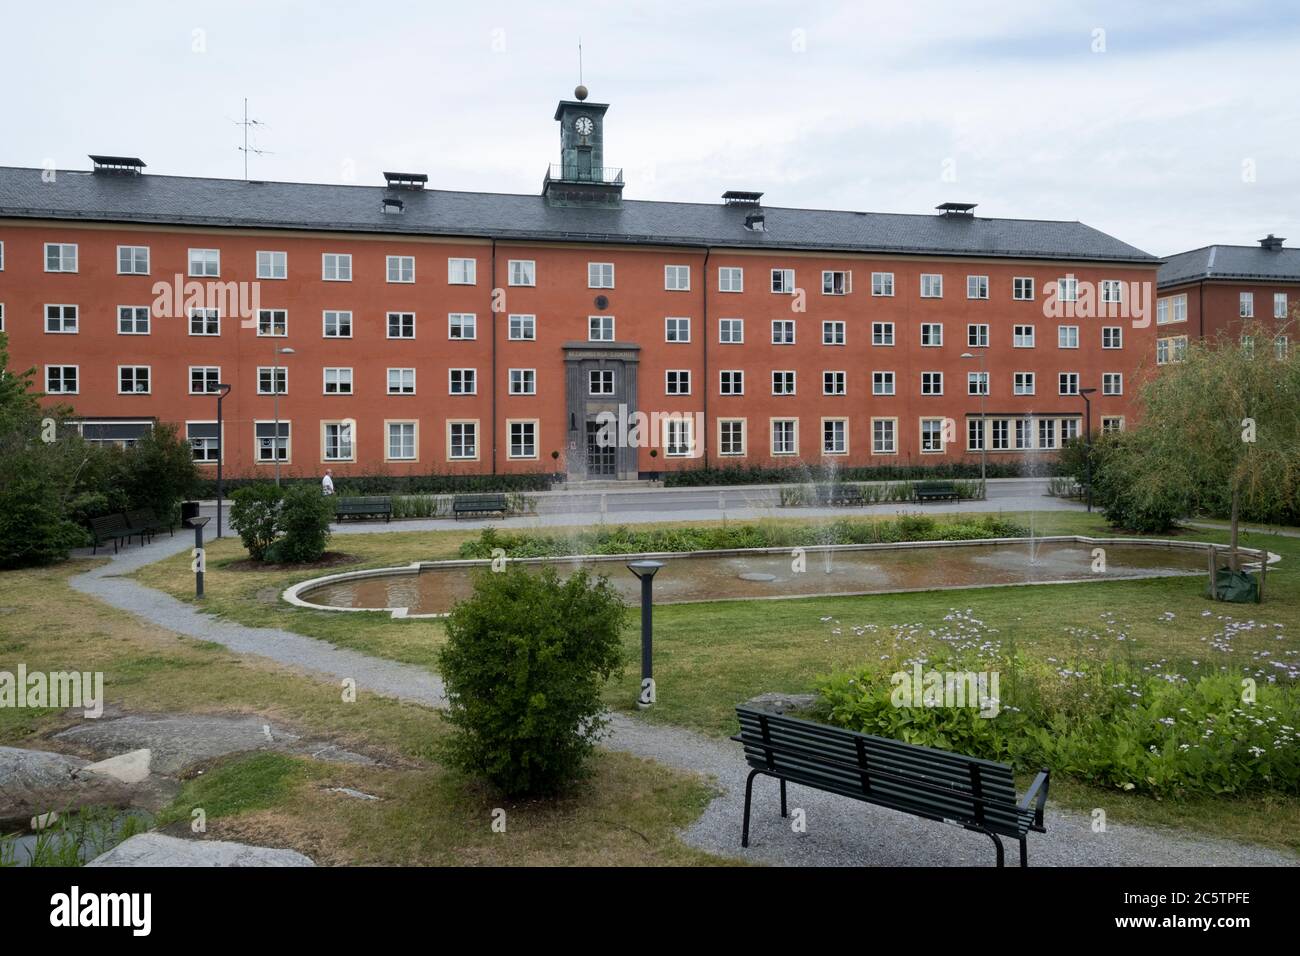 Formerly Bromma Hospital, which is now converted into apartments. Stock Photo